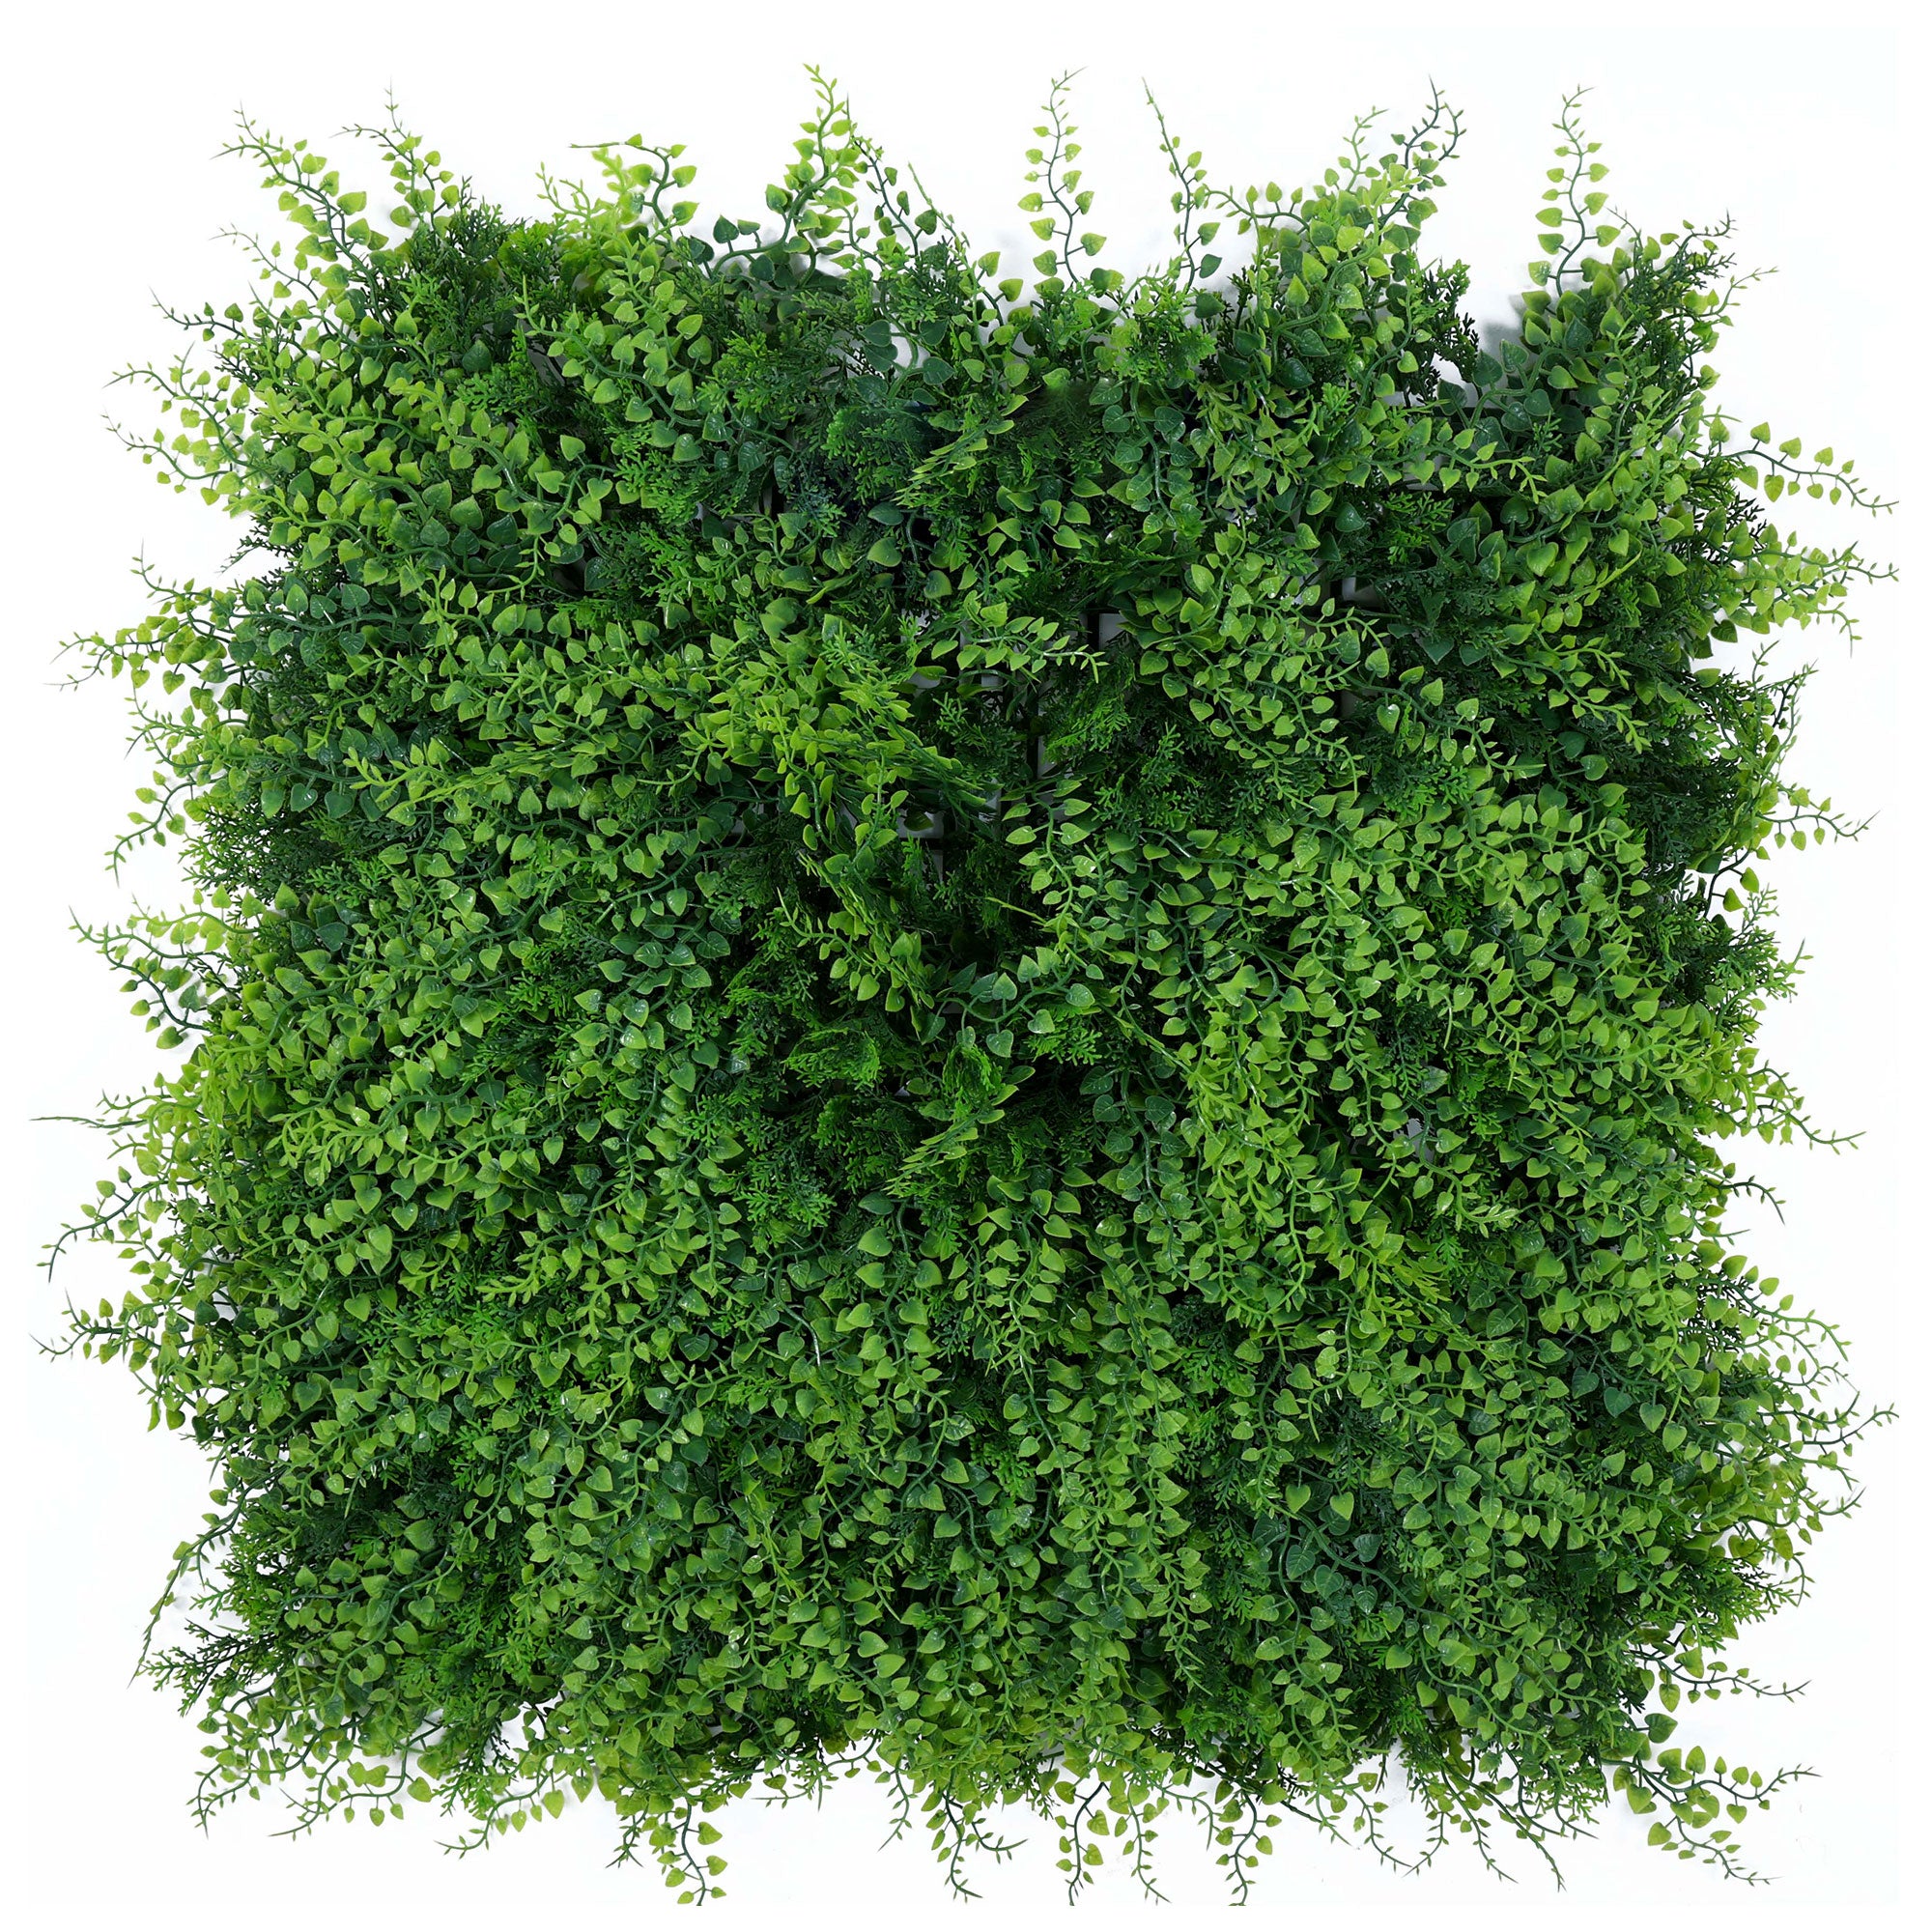 Large Lush Green Leaves Artificial Vertical Garden Wall Tile (Size: 50cm x 50cm, Pack of 1)